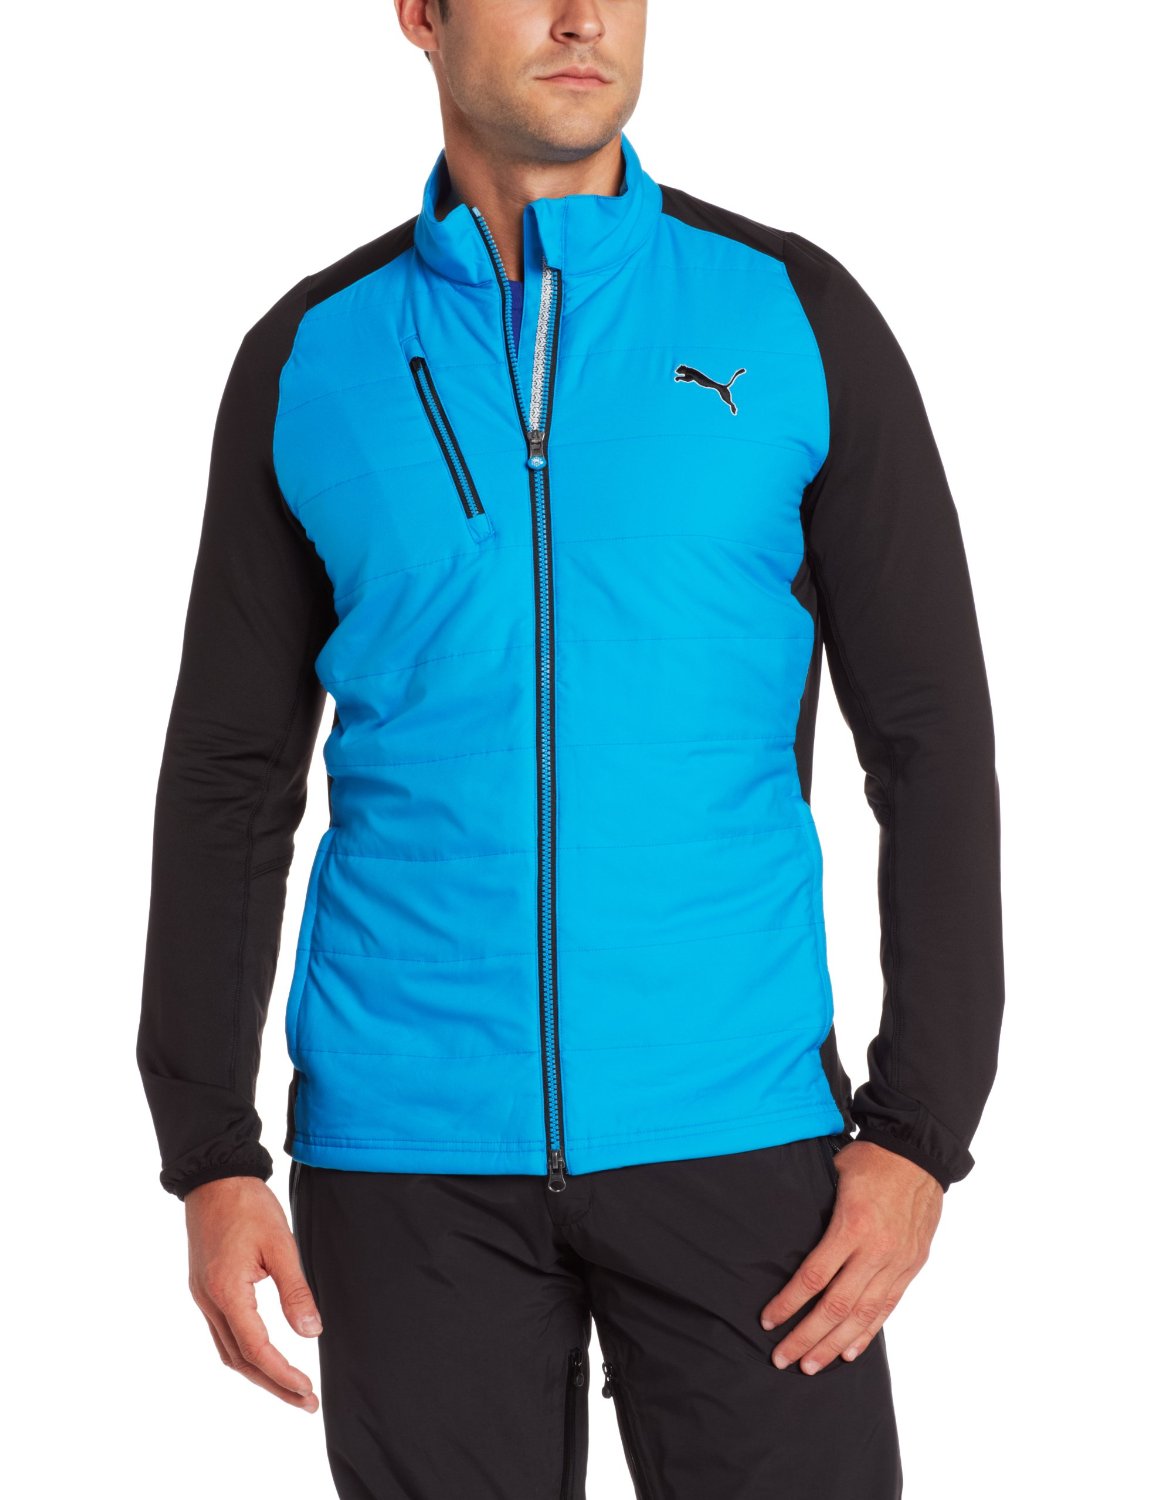 Buy Puma Mens Golf Jackets for Best Prices Online!